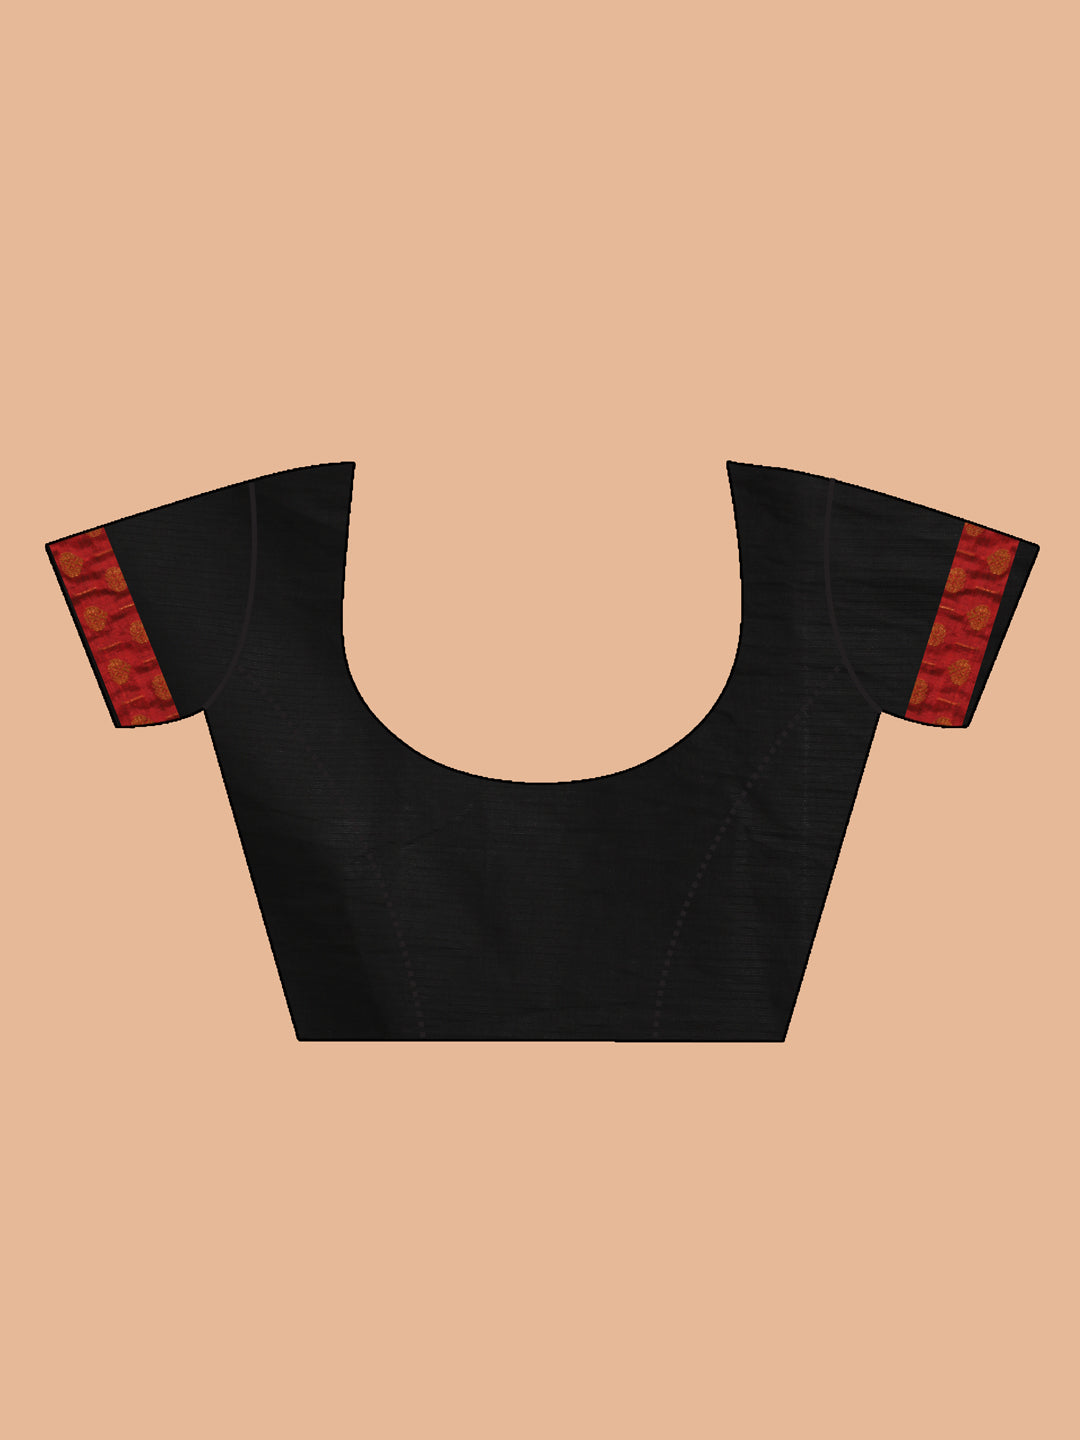 Indethnic Black Pure Cotton Solid Saree - Blouse Piece View